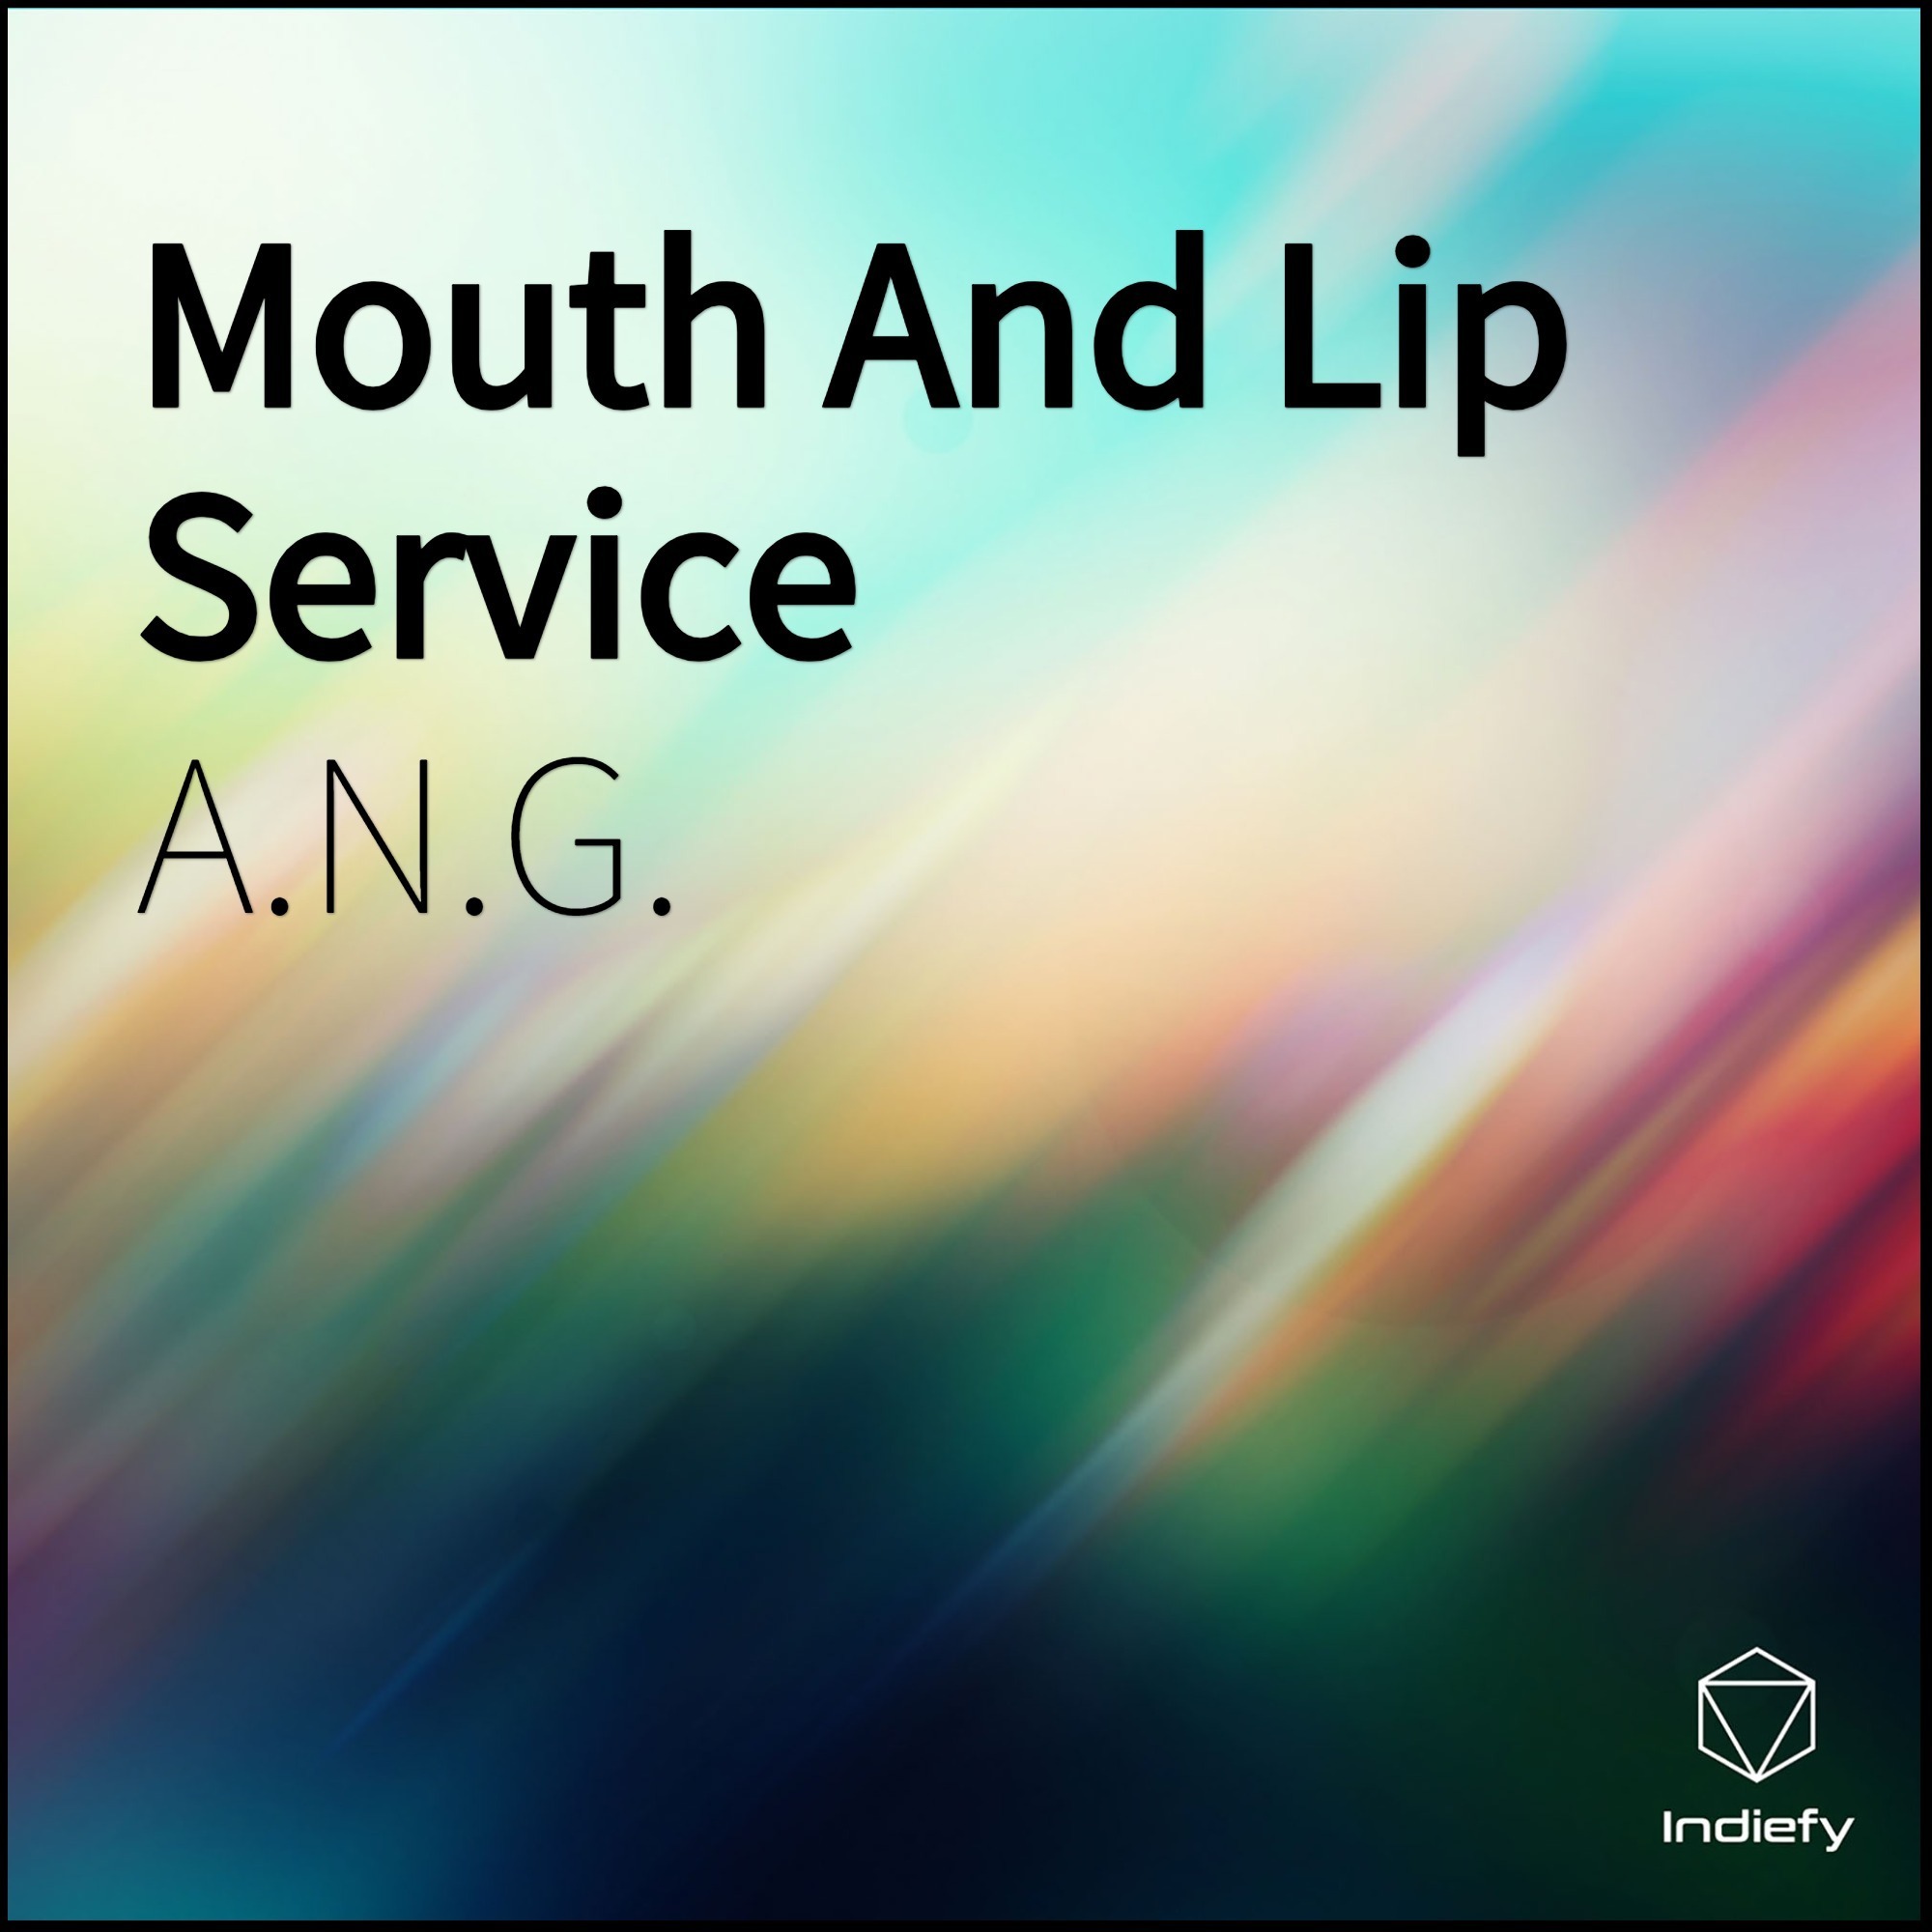 Mouth And Lip Service